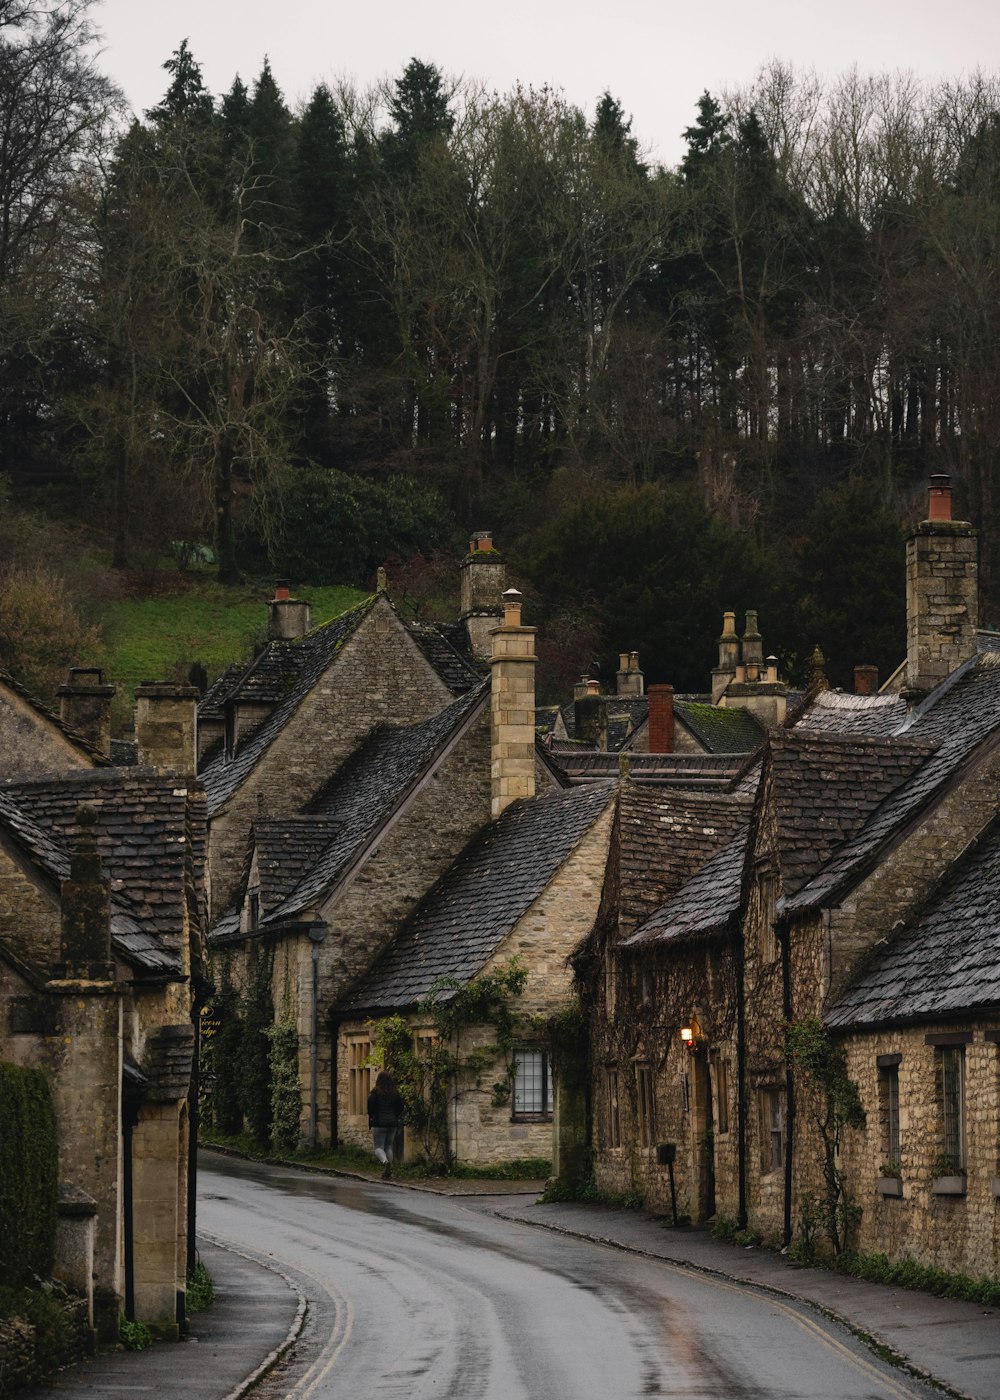 a street lined with stone houses in a rural area